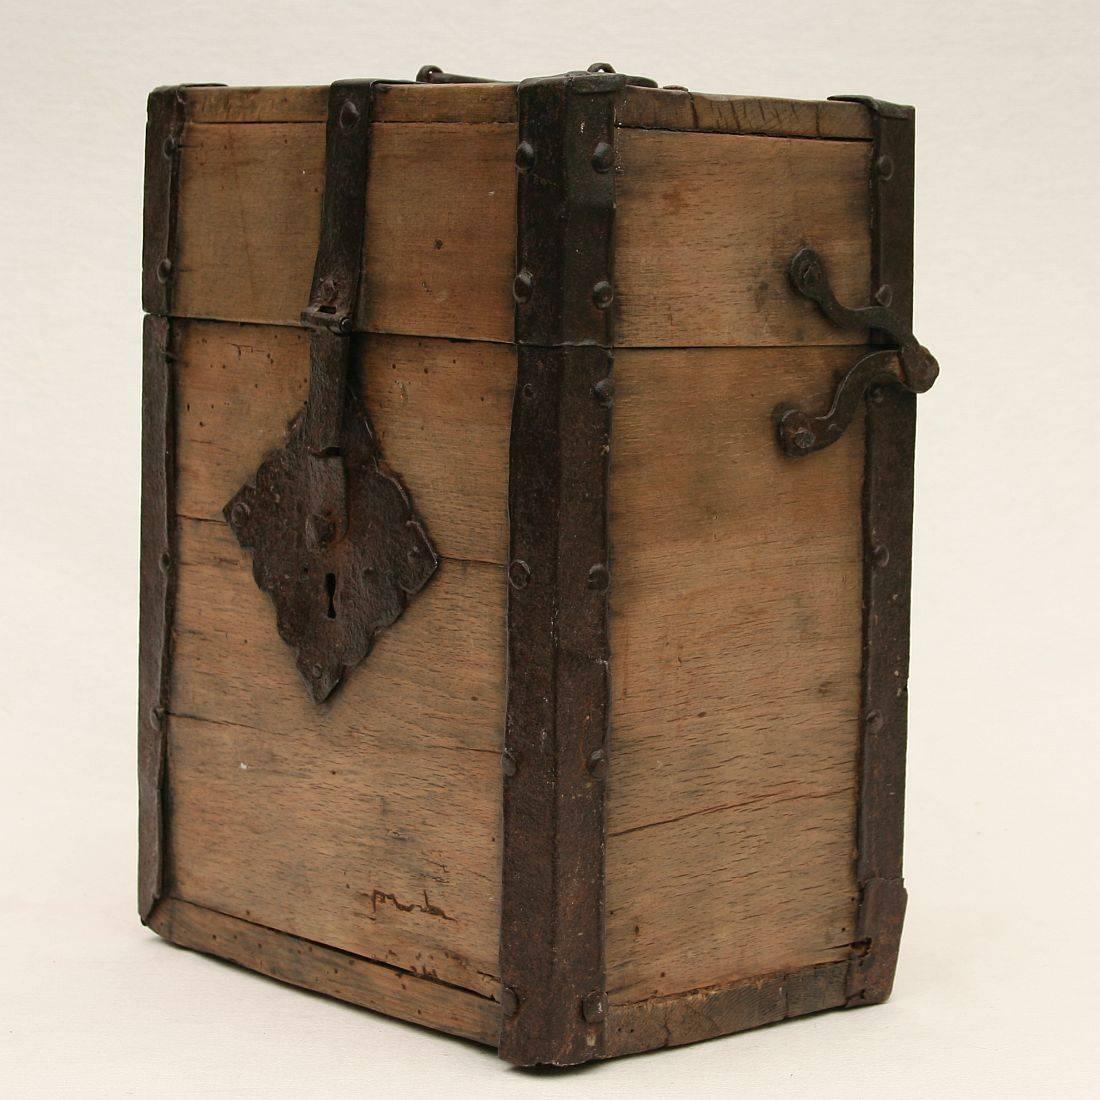 Spectacular wooden box with it's wrought iron details
Germany, circa 1600-1750. Beautiful weathered box, lock is broken, key is missing. For its high age in a relative good condition.
  